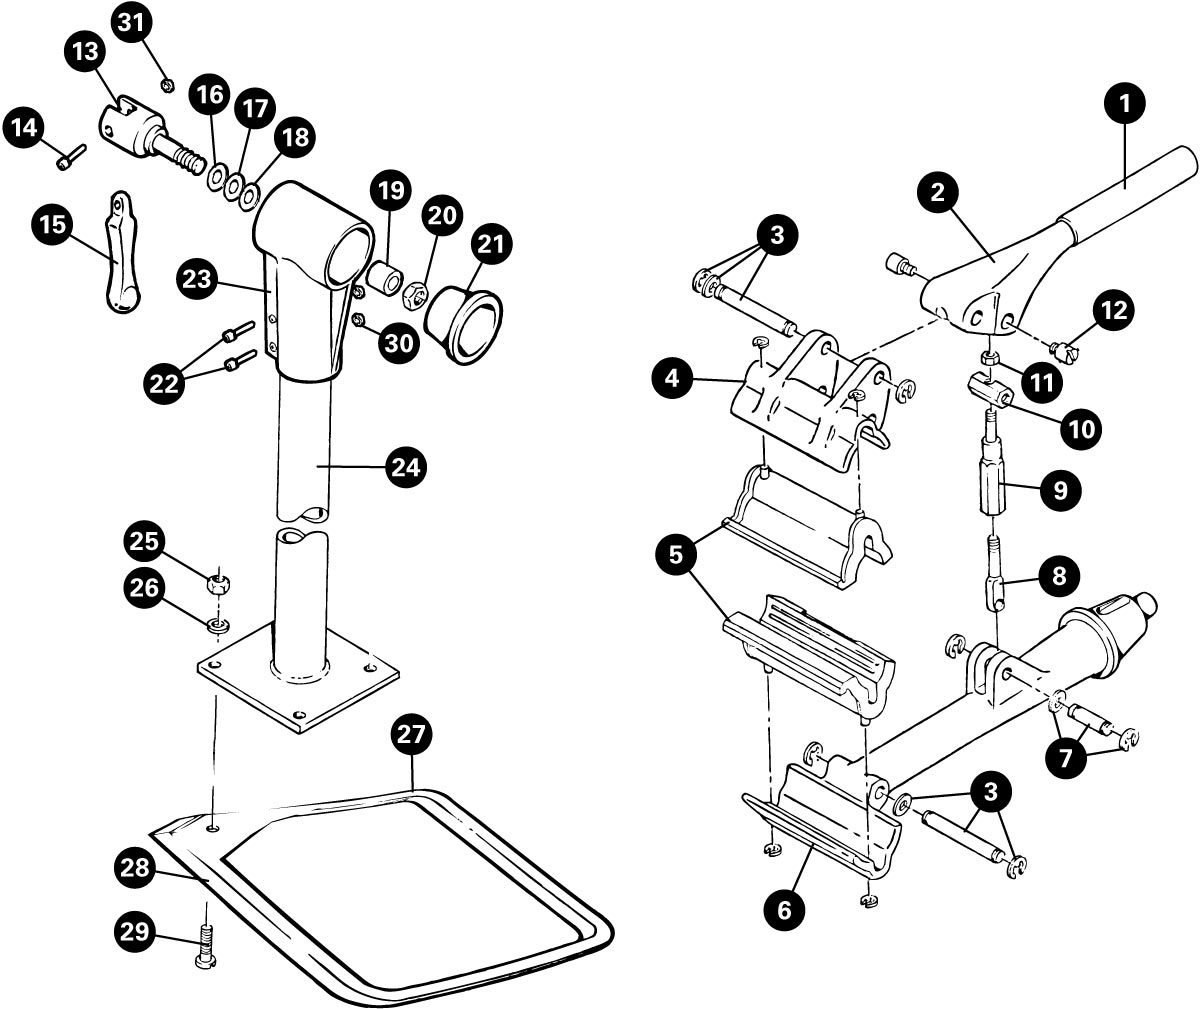 Parts diagram for PRS-6 Single Arm Repair Stand, enlarged